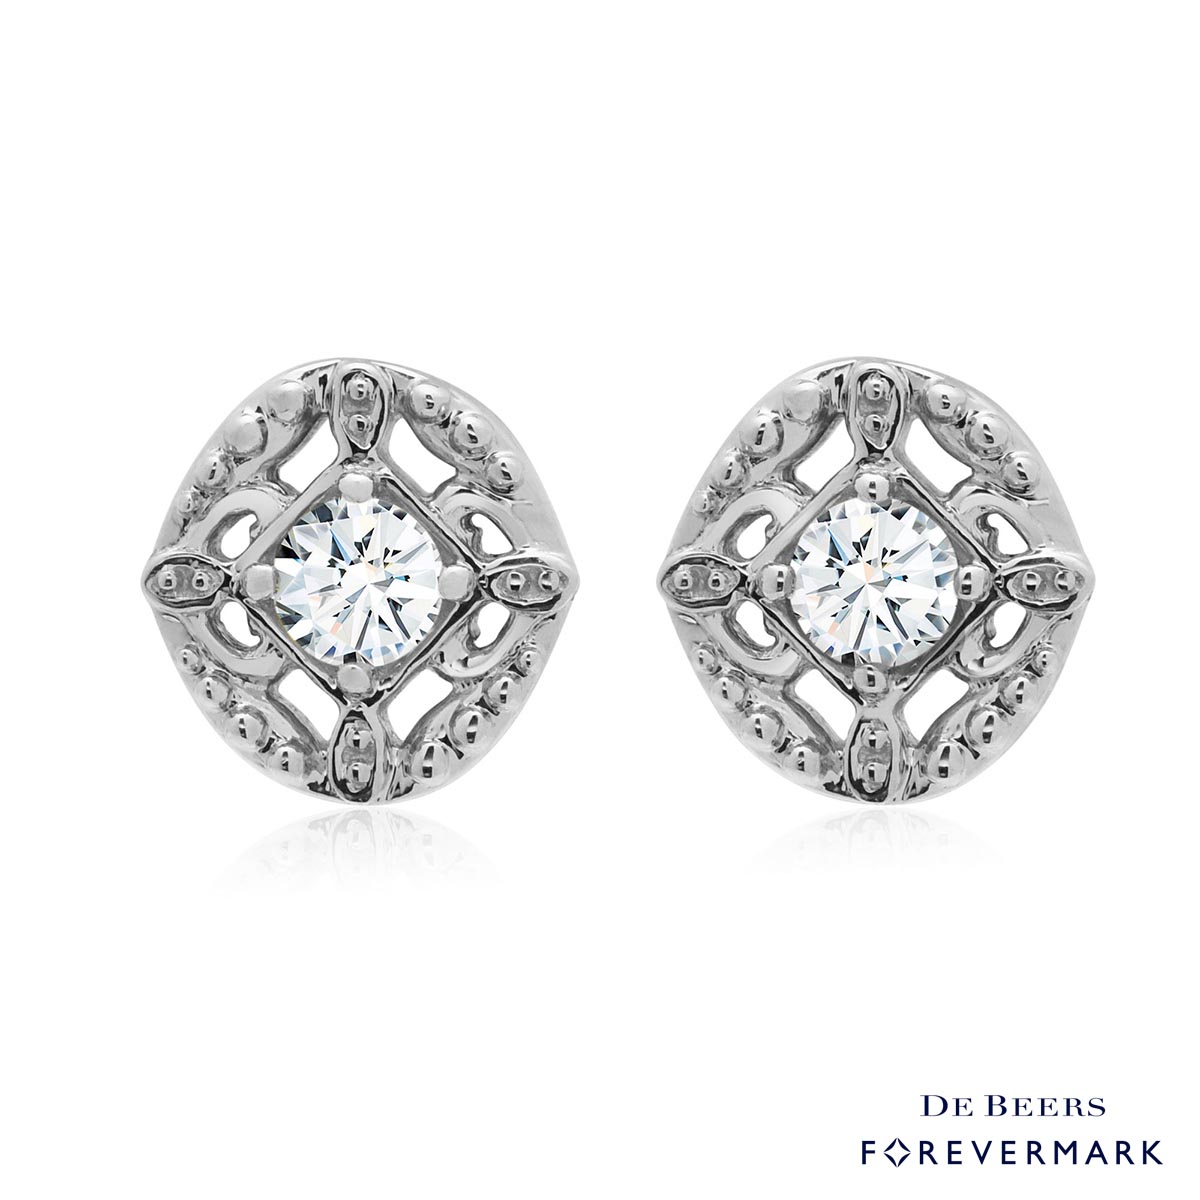 De Beers Forevermark Lace Collection Diamond Stud Earrings in 14kt White Gold (1/5ct tw)